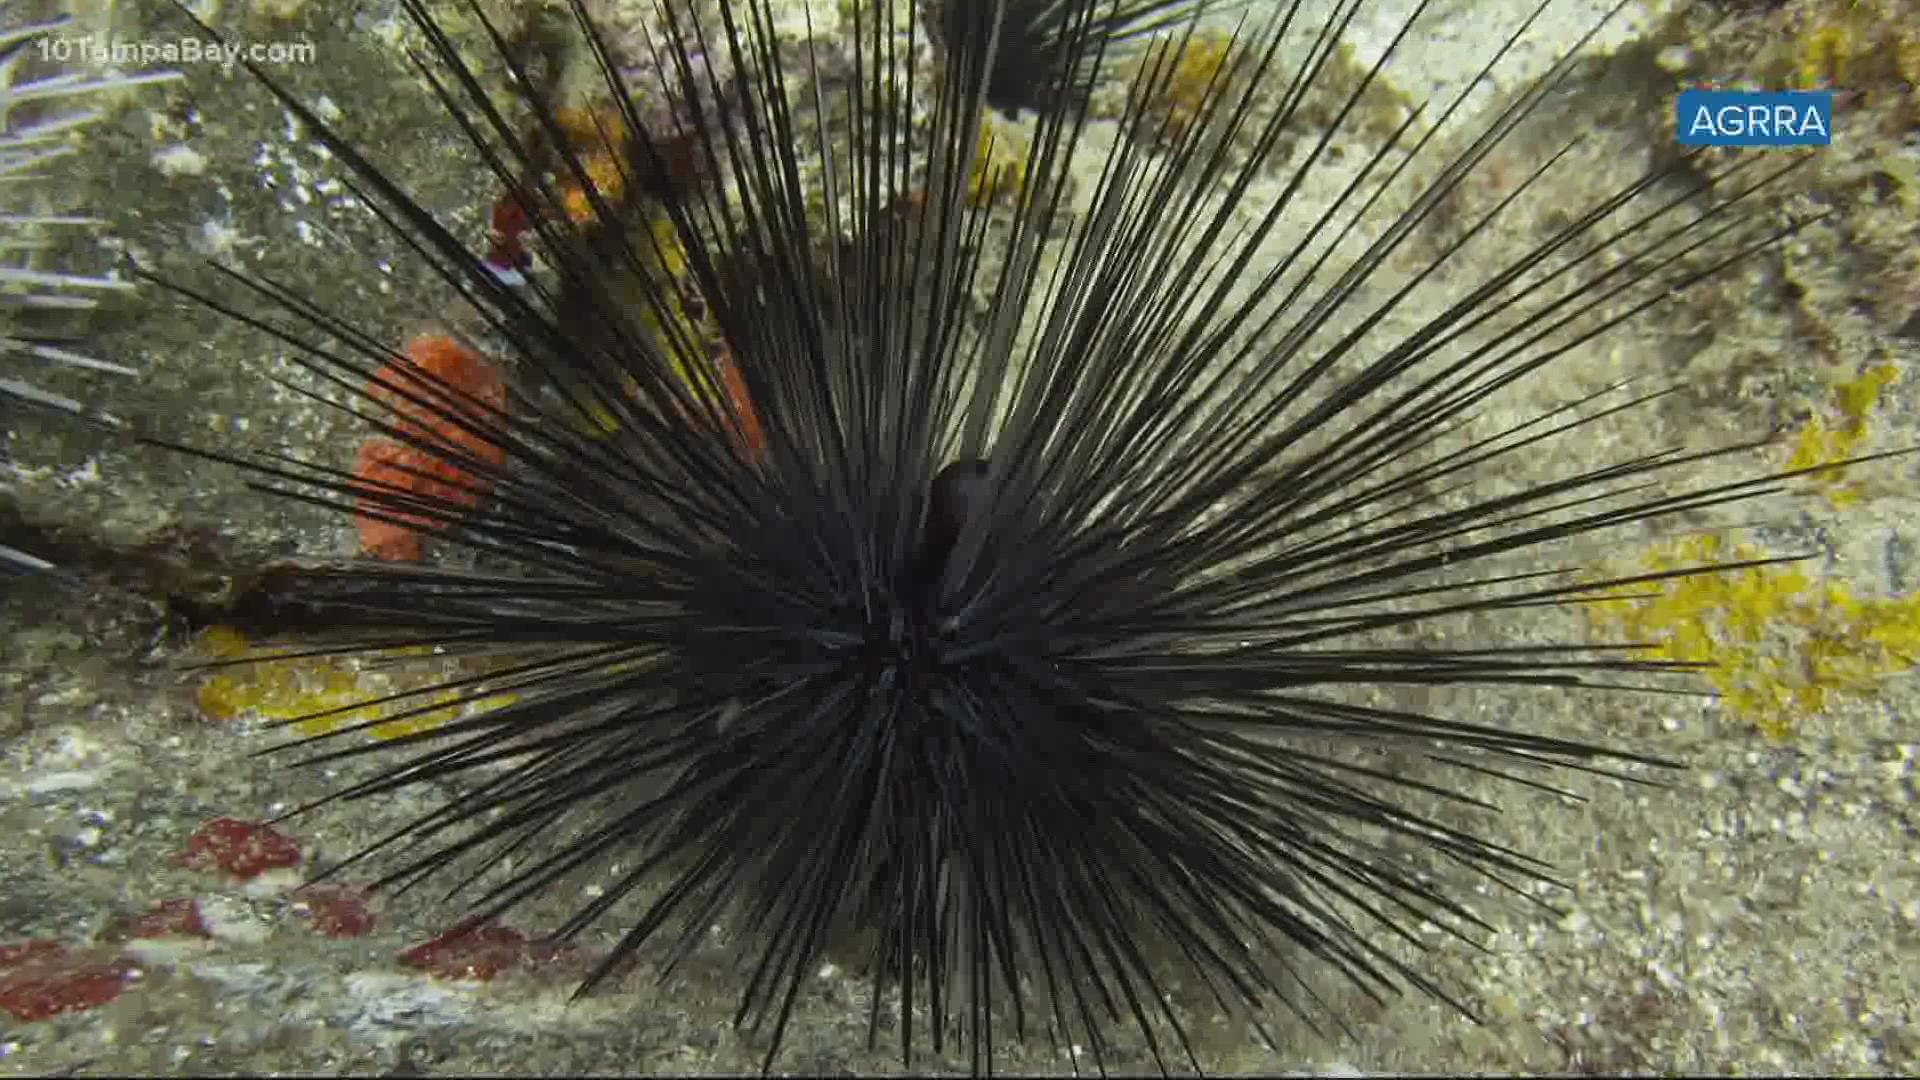 Sea urchins are one of the most important herbivores in the sea, removing algae from reefs.